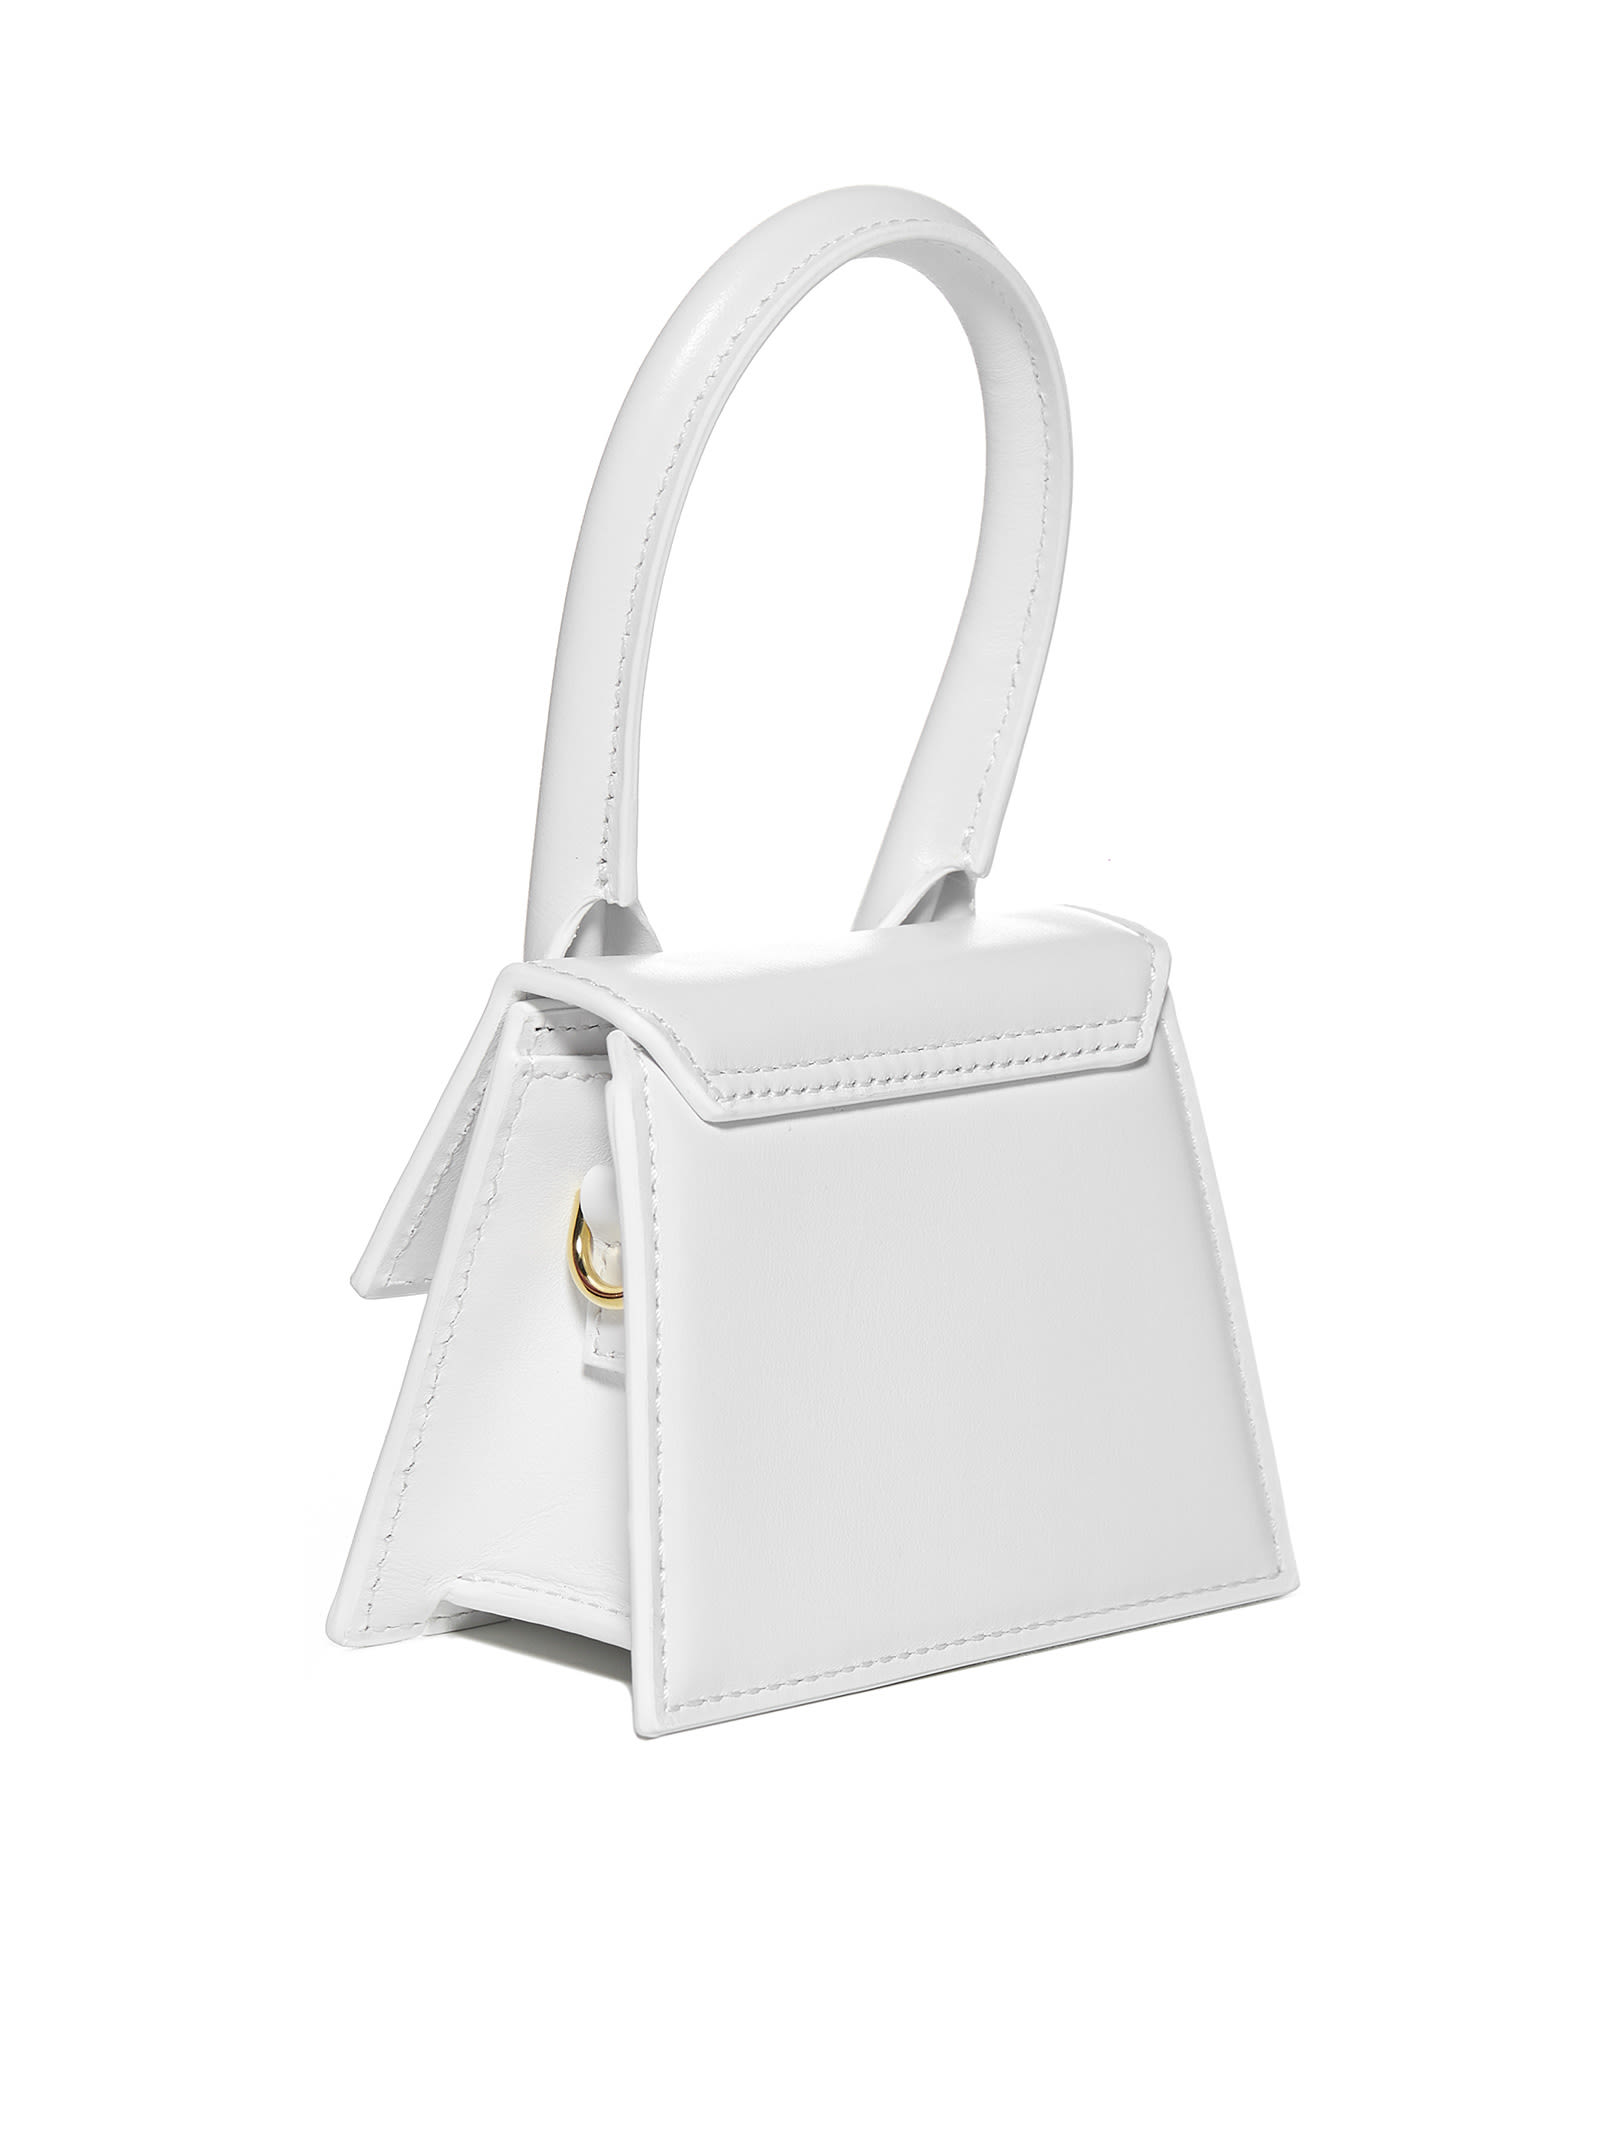 Shop Jacquemus Tote In White